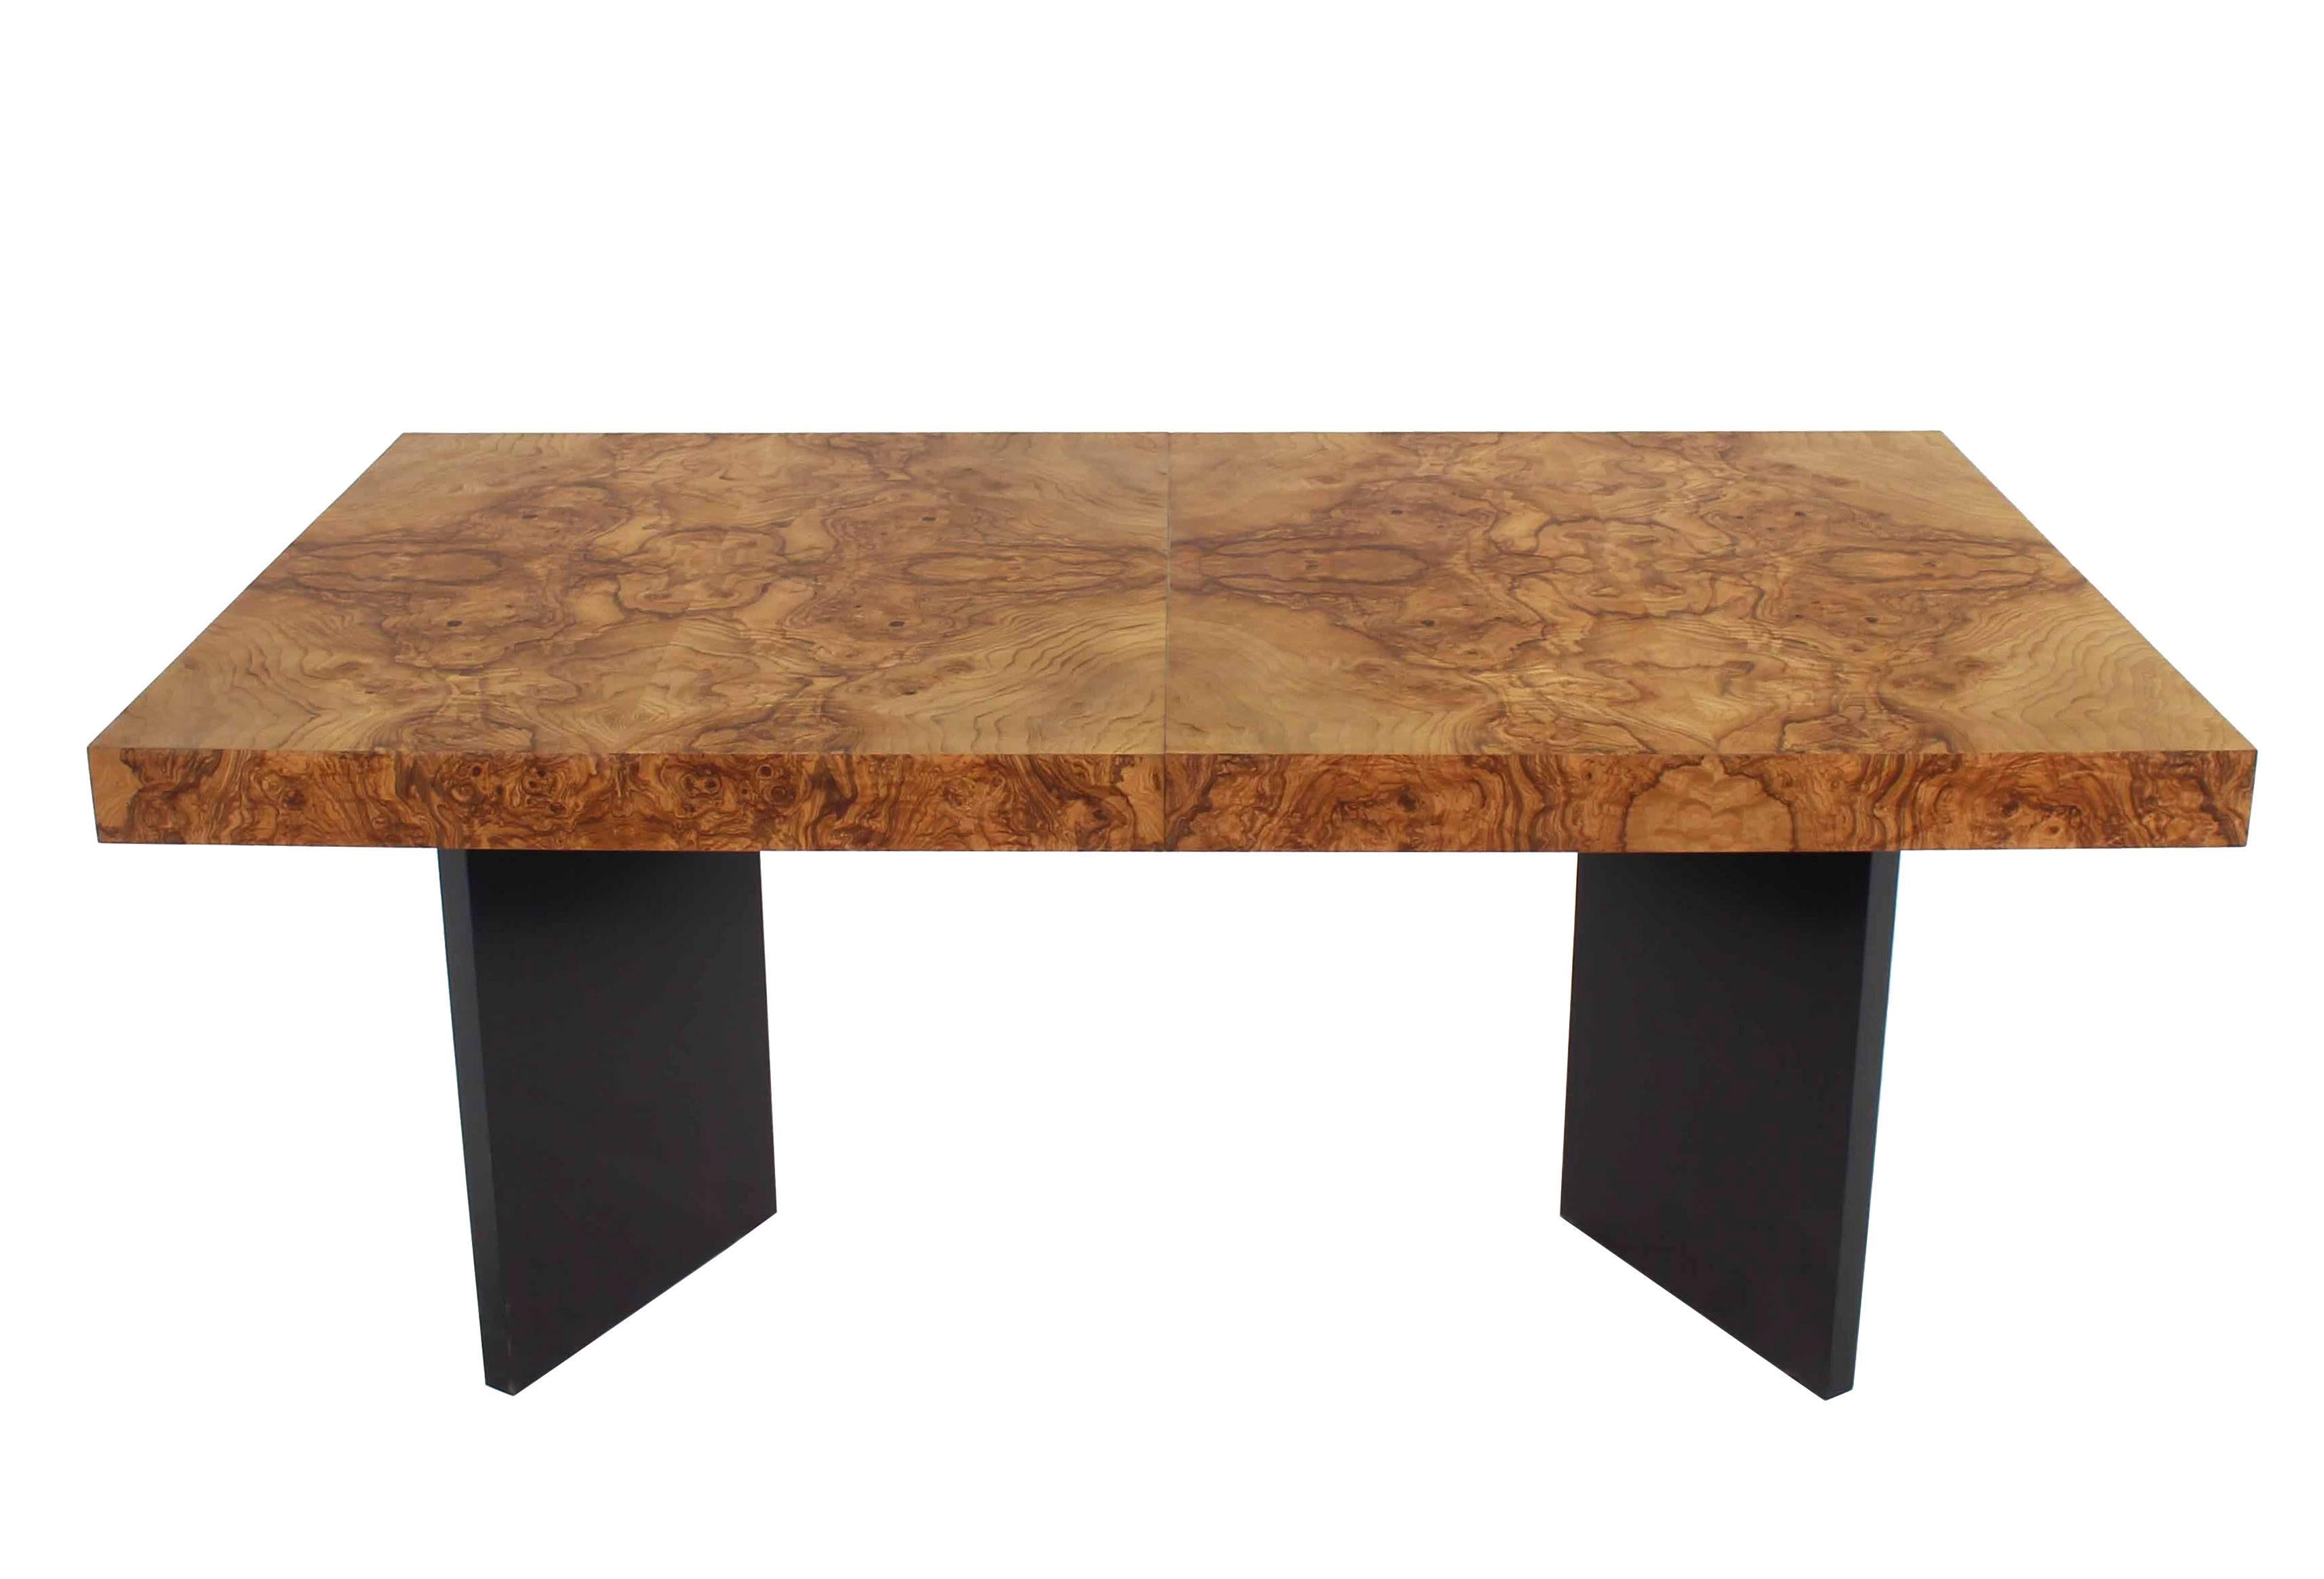 Burl Wood Dining Table Black Lacquer Base Two Extension Leaves 2